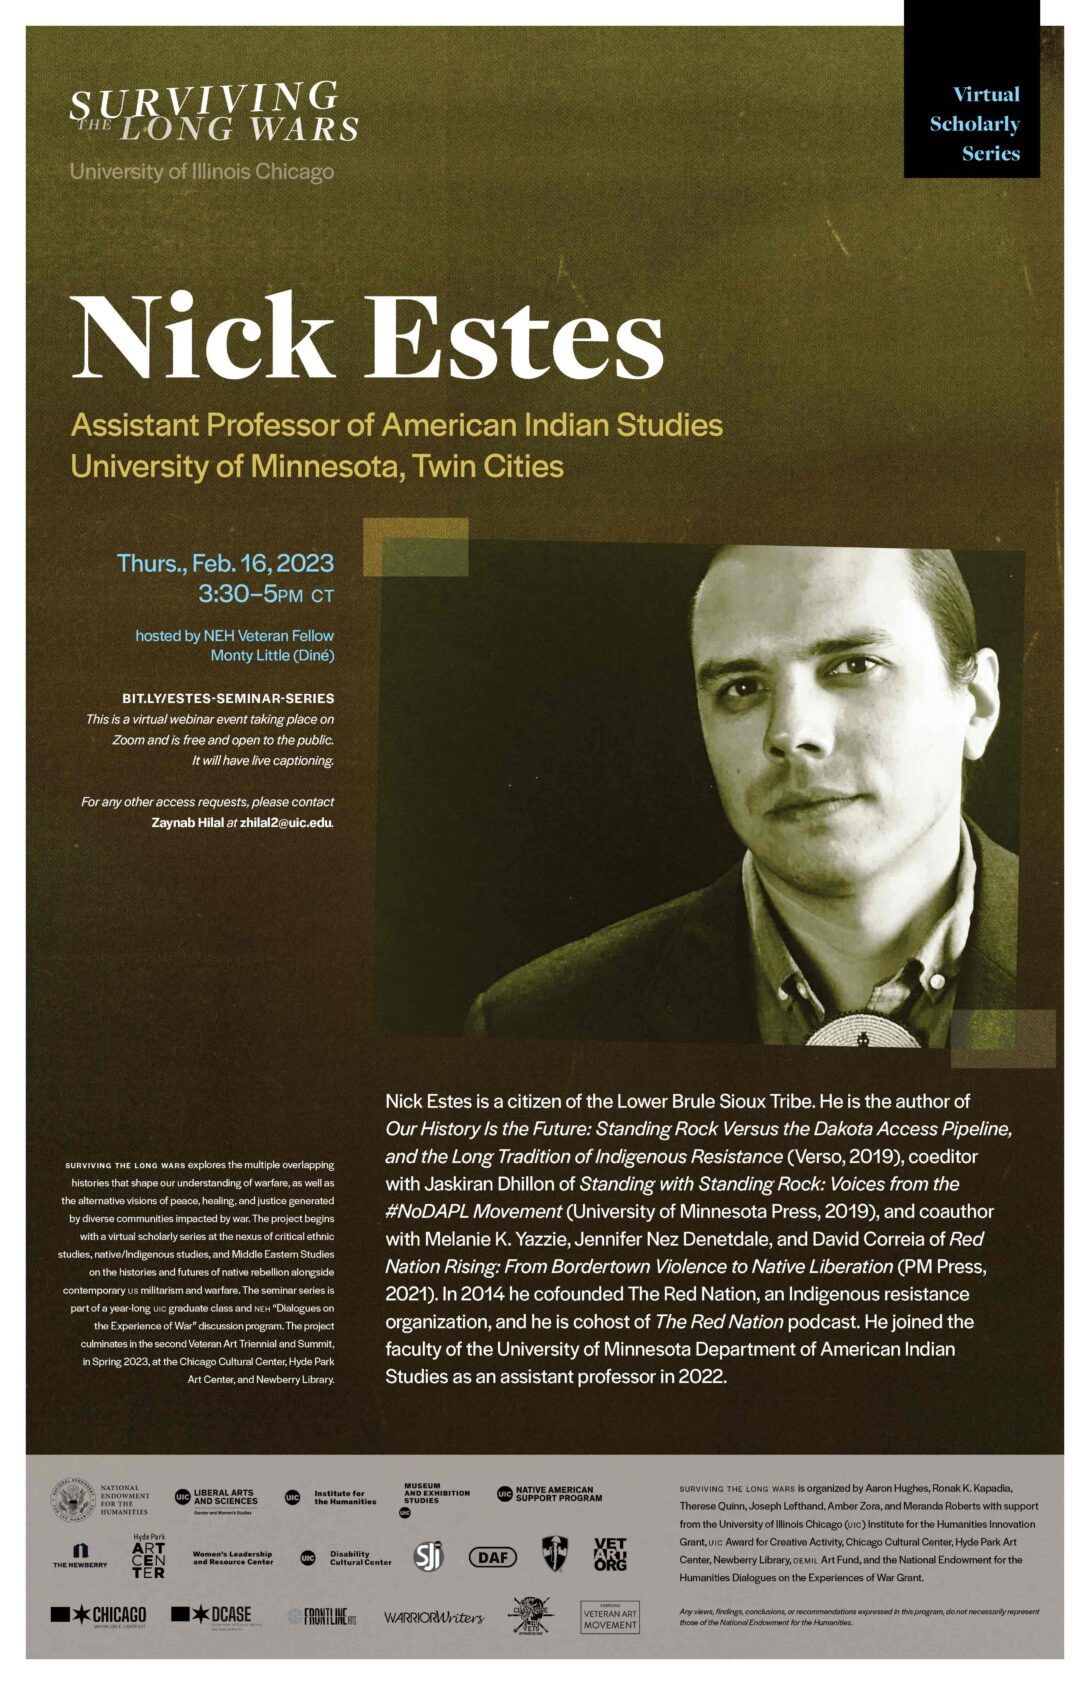 A green poster with text announcing a virtual lecture by Dr. Nick Estes on Thursday, February 16th. The project’s title 'Surviving the Long Wars' is written in large text at the top of the flyer along with Nick Estes. The poster has a headshot of Estes, his bio, and details about the series.